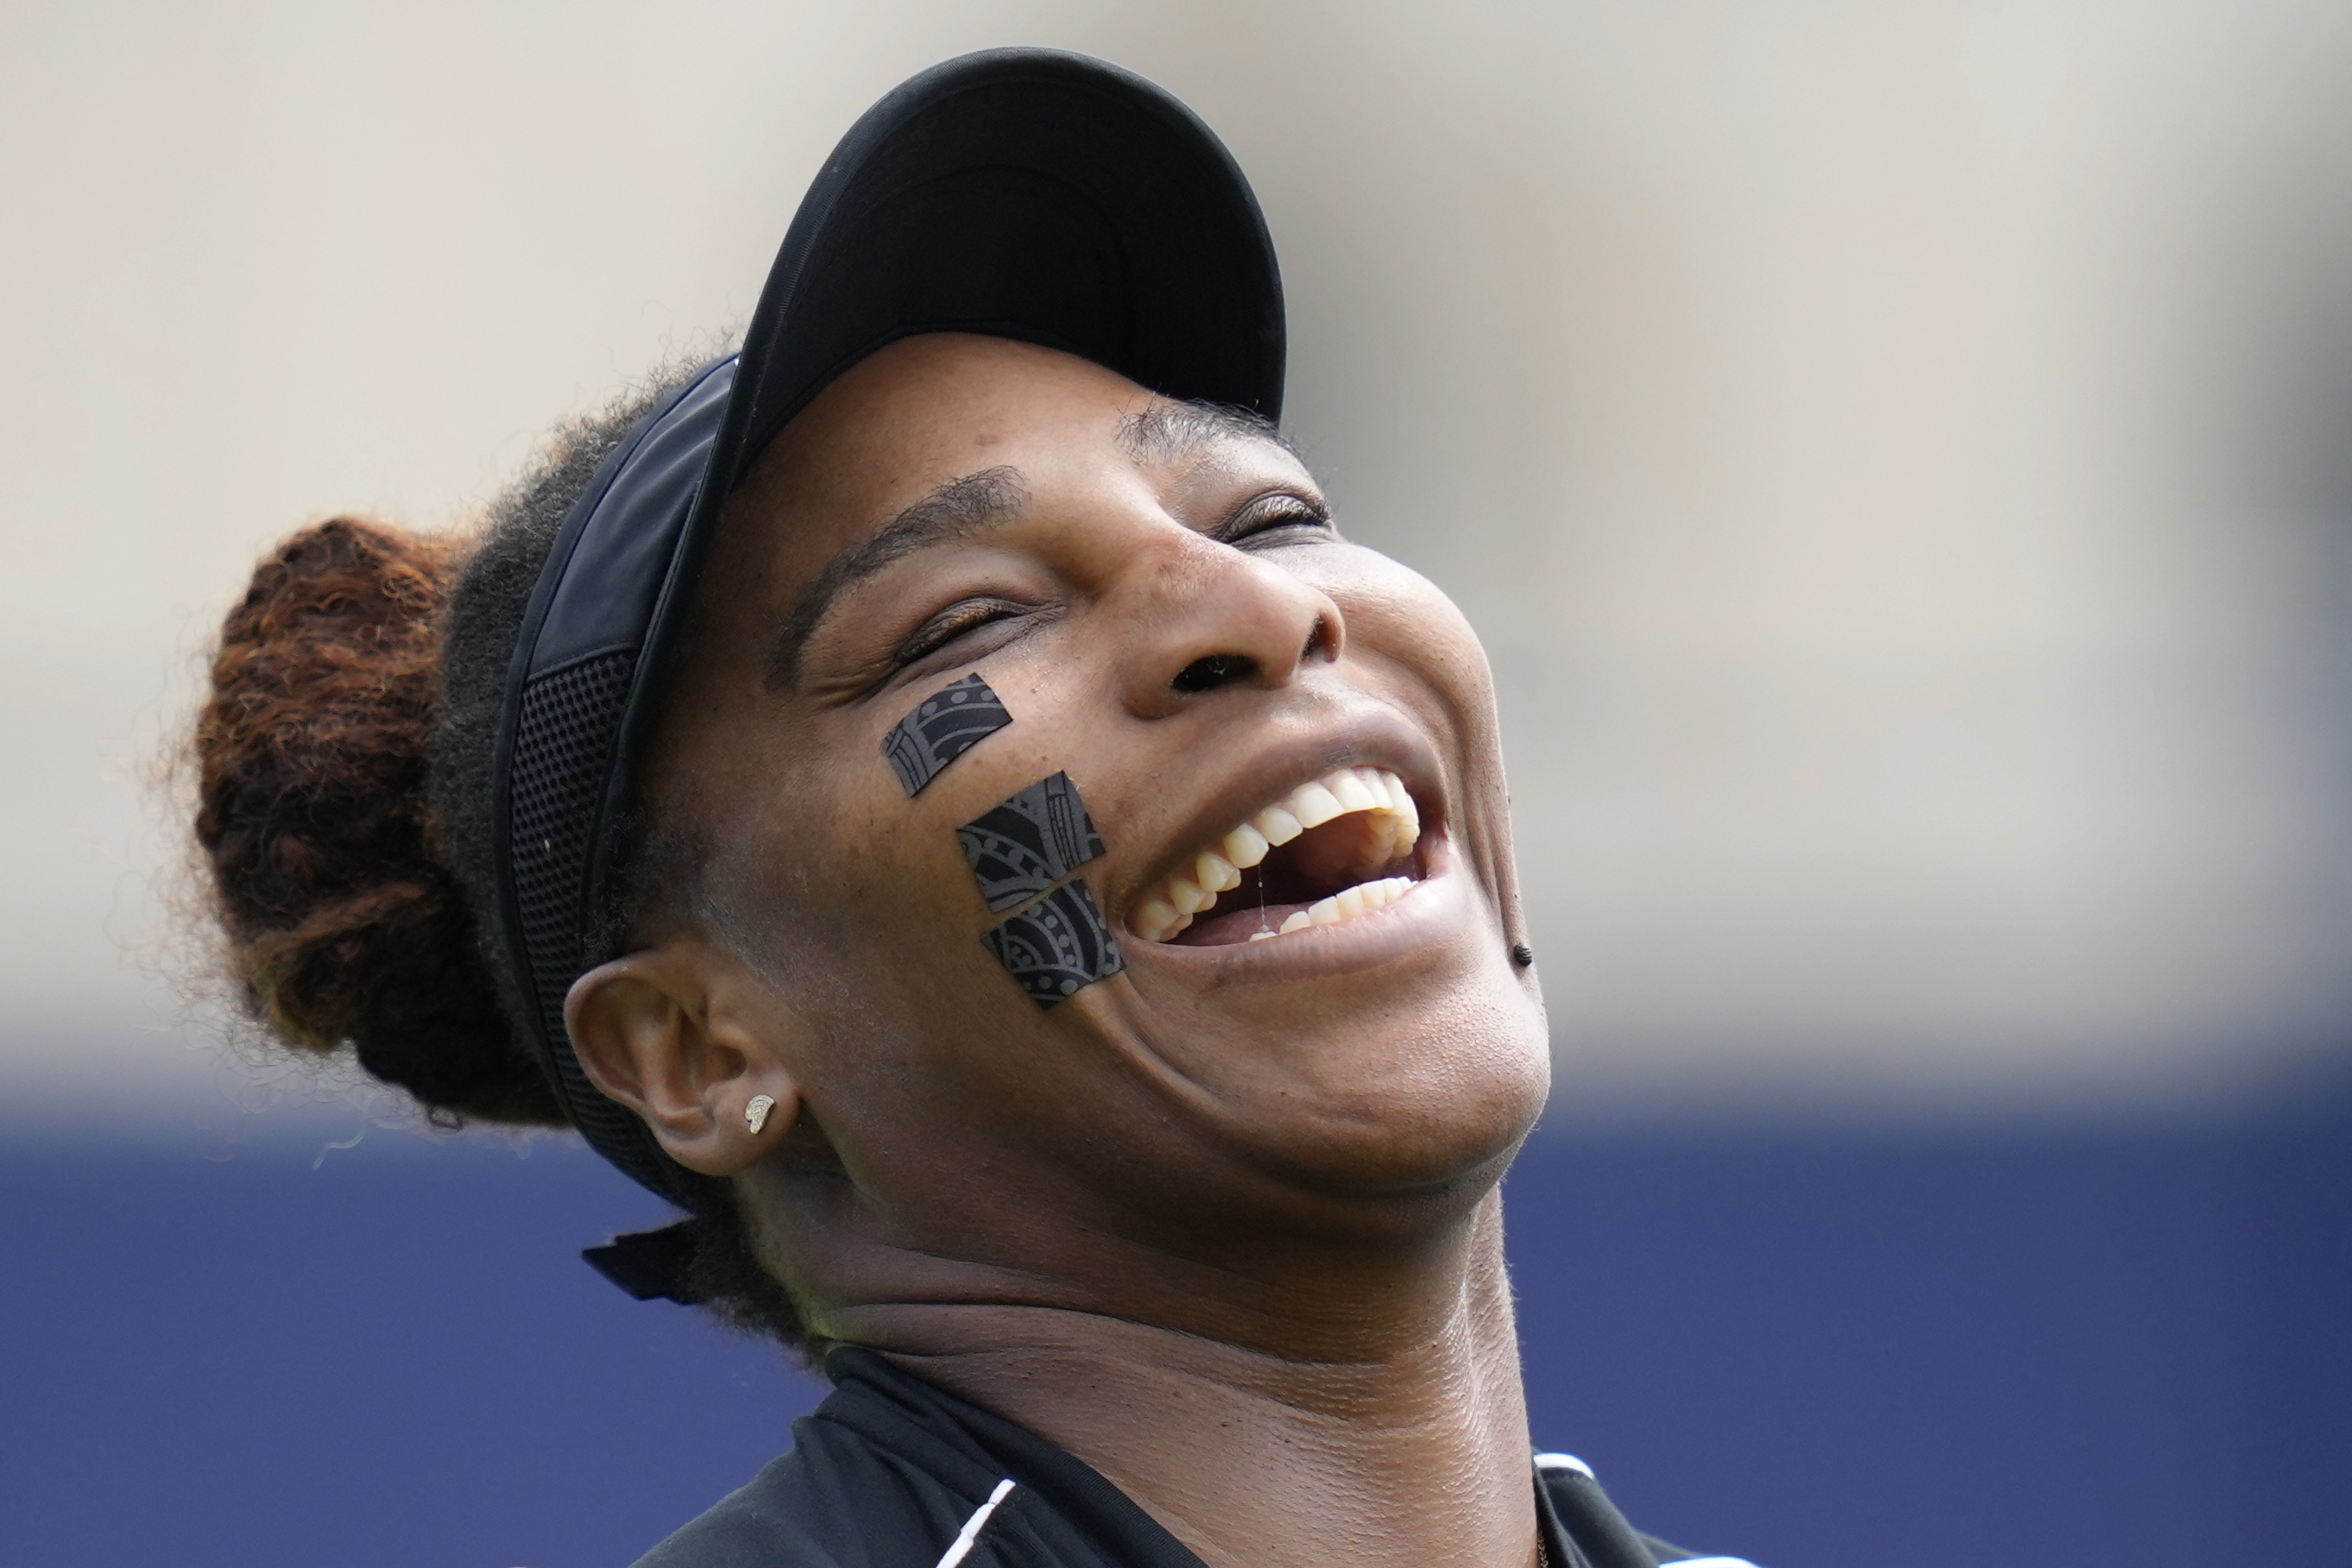 Serena Williams of the United States laughs during a practice session at the Eastbourne International tennis tournament in Eastbourne, England, Tuesday, June 21, 2022. Serena Williams will play a doubles match with partner Ons Jabeur of Tunisia at the tournament later Tuesday. (AP Photo/Kirsty Wigglesworth)